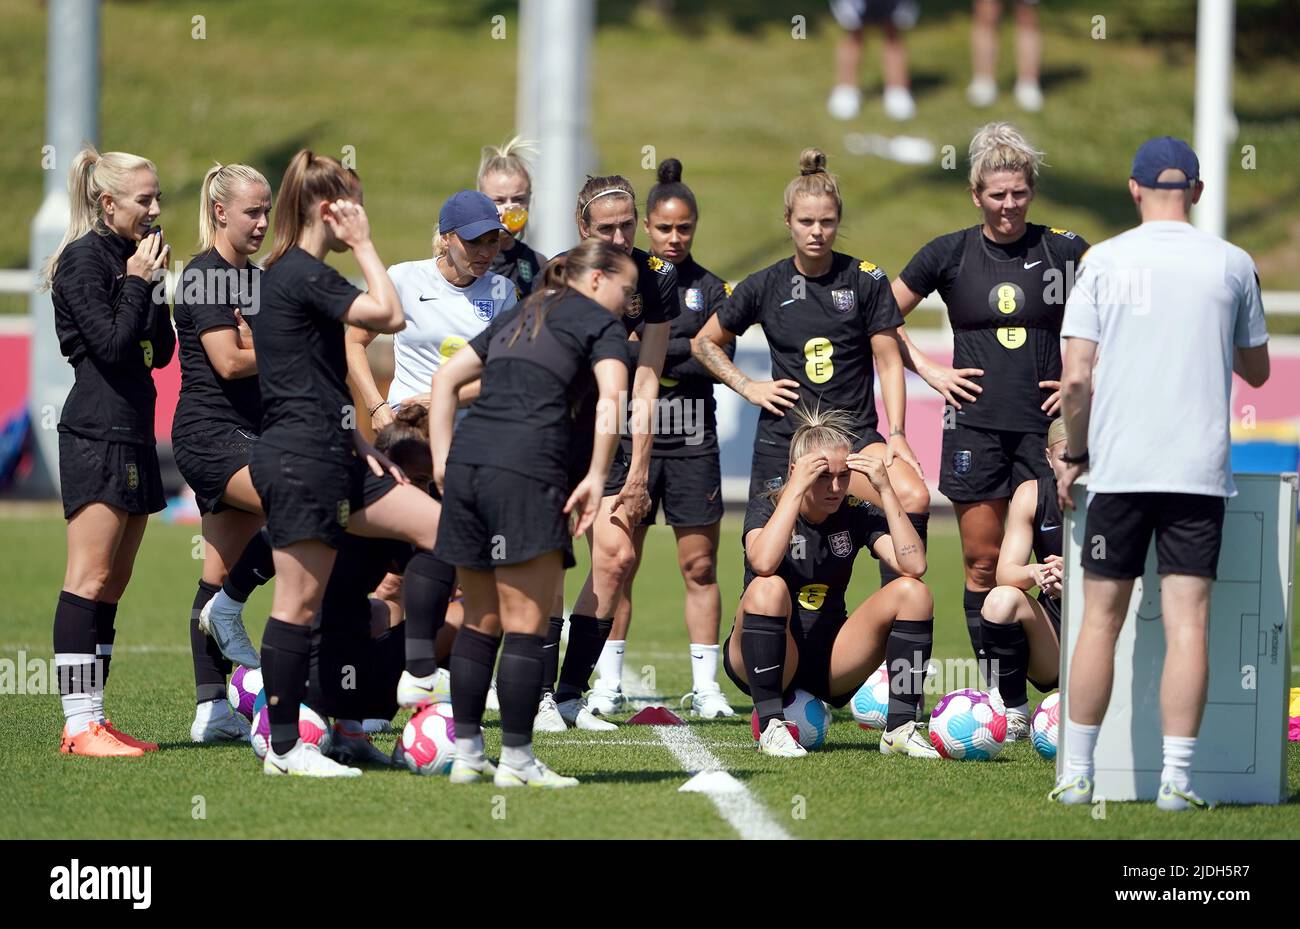 England manager Sarina Wiegman and assistant Arjan Veurink give a team talk during a training session at St George's Park, Burton-upon-Trent. Picture date: Tuesday June 21, 2022. Stock Photo